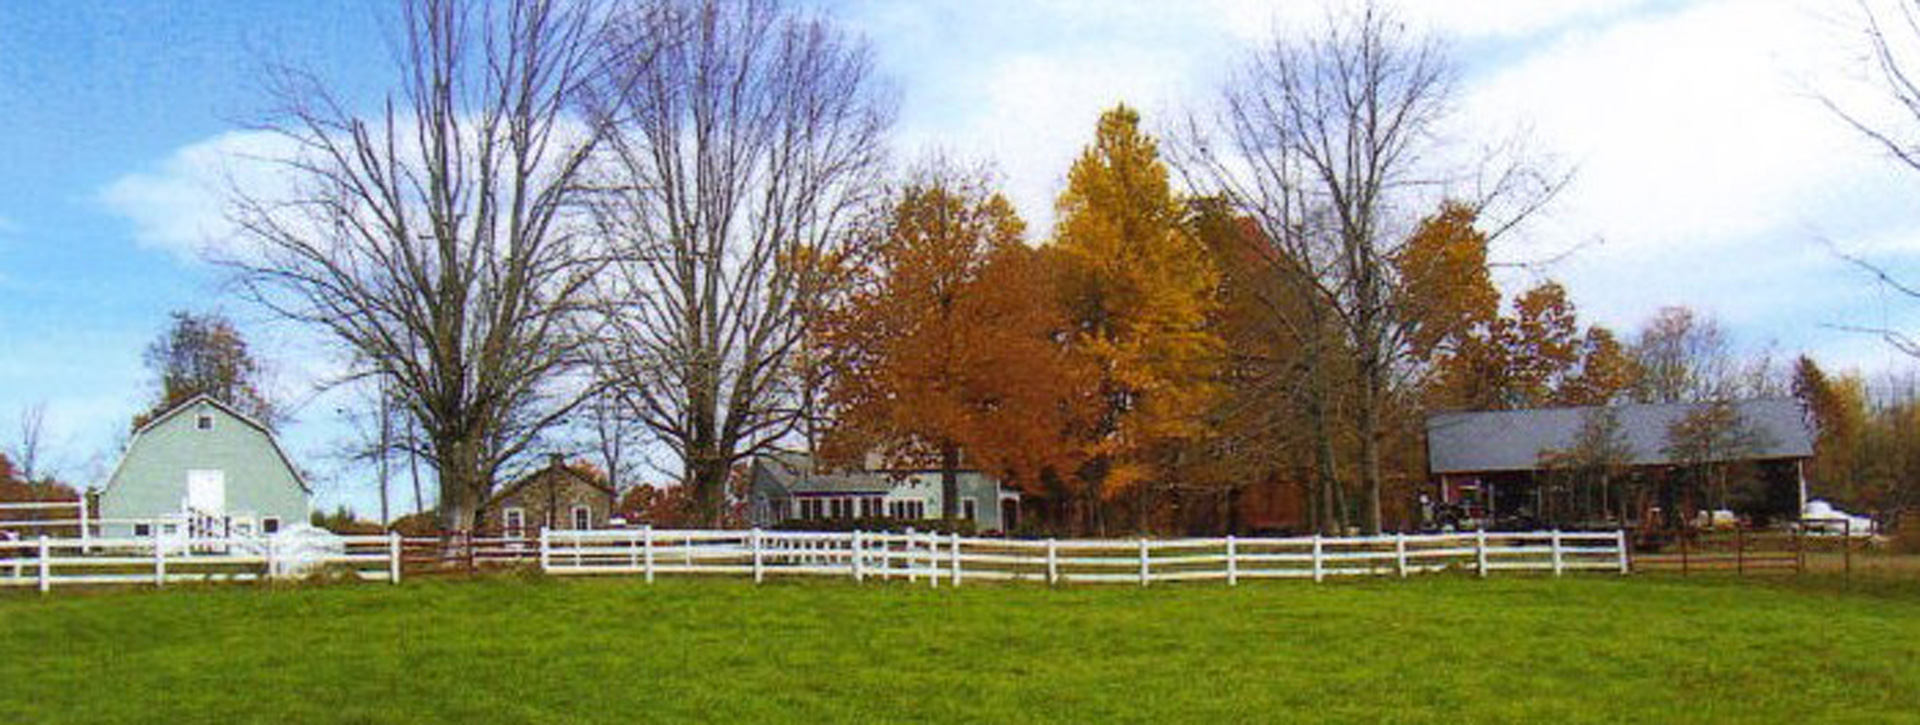 A scenic view of Manning Hill Farm in late autumn